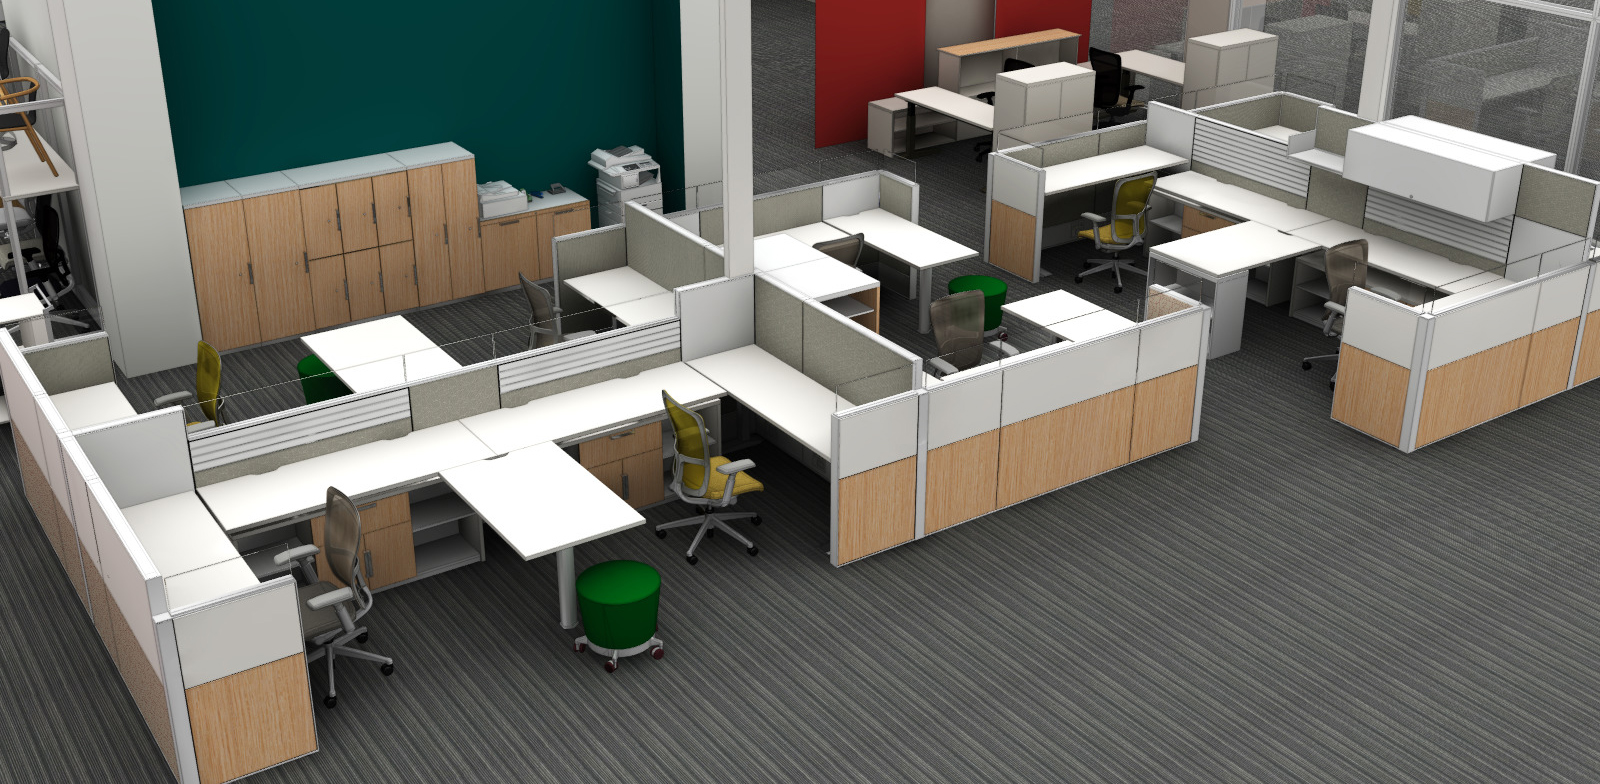 A rendering of our office layout before the reconfiguration.